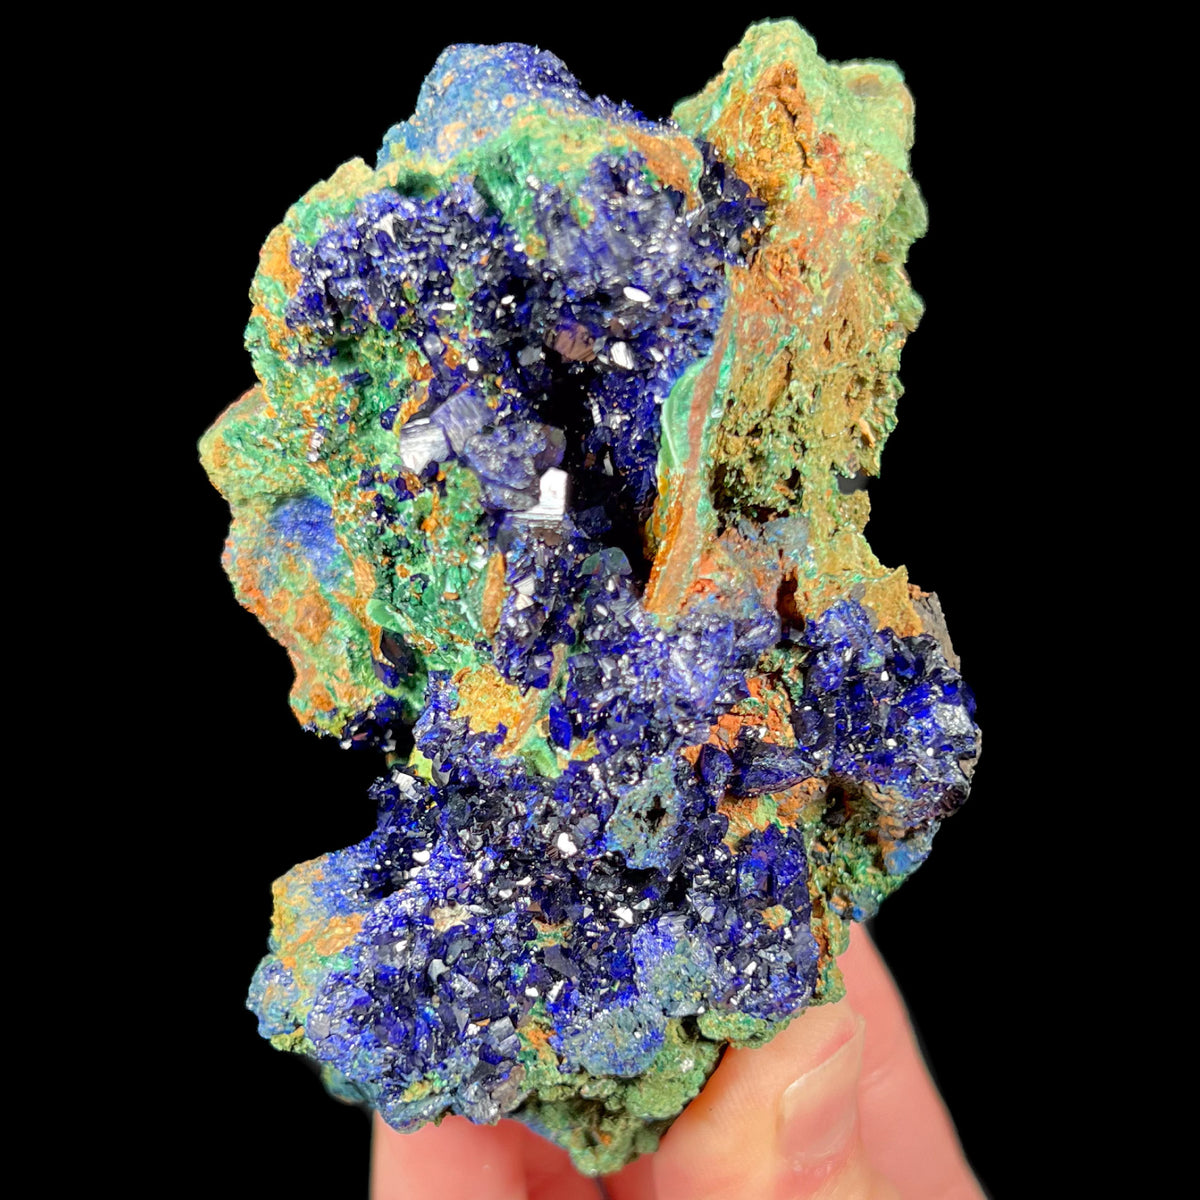 Blue Azurite Crystals with Green Malachite Crystals